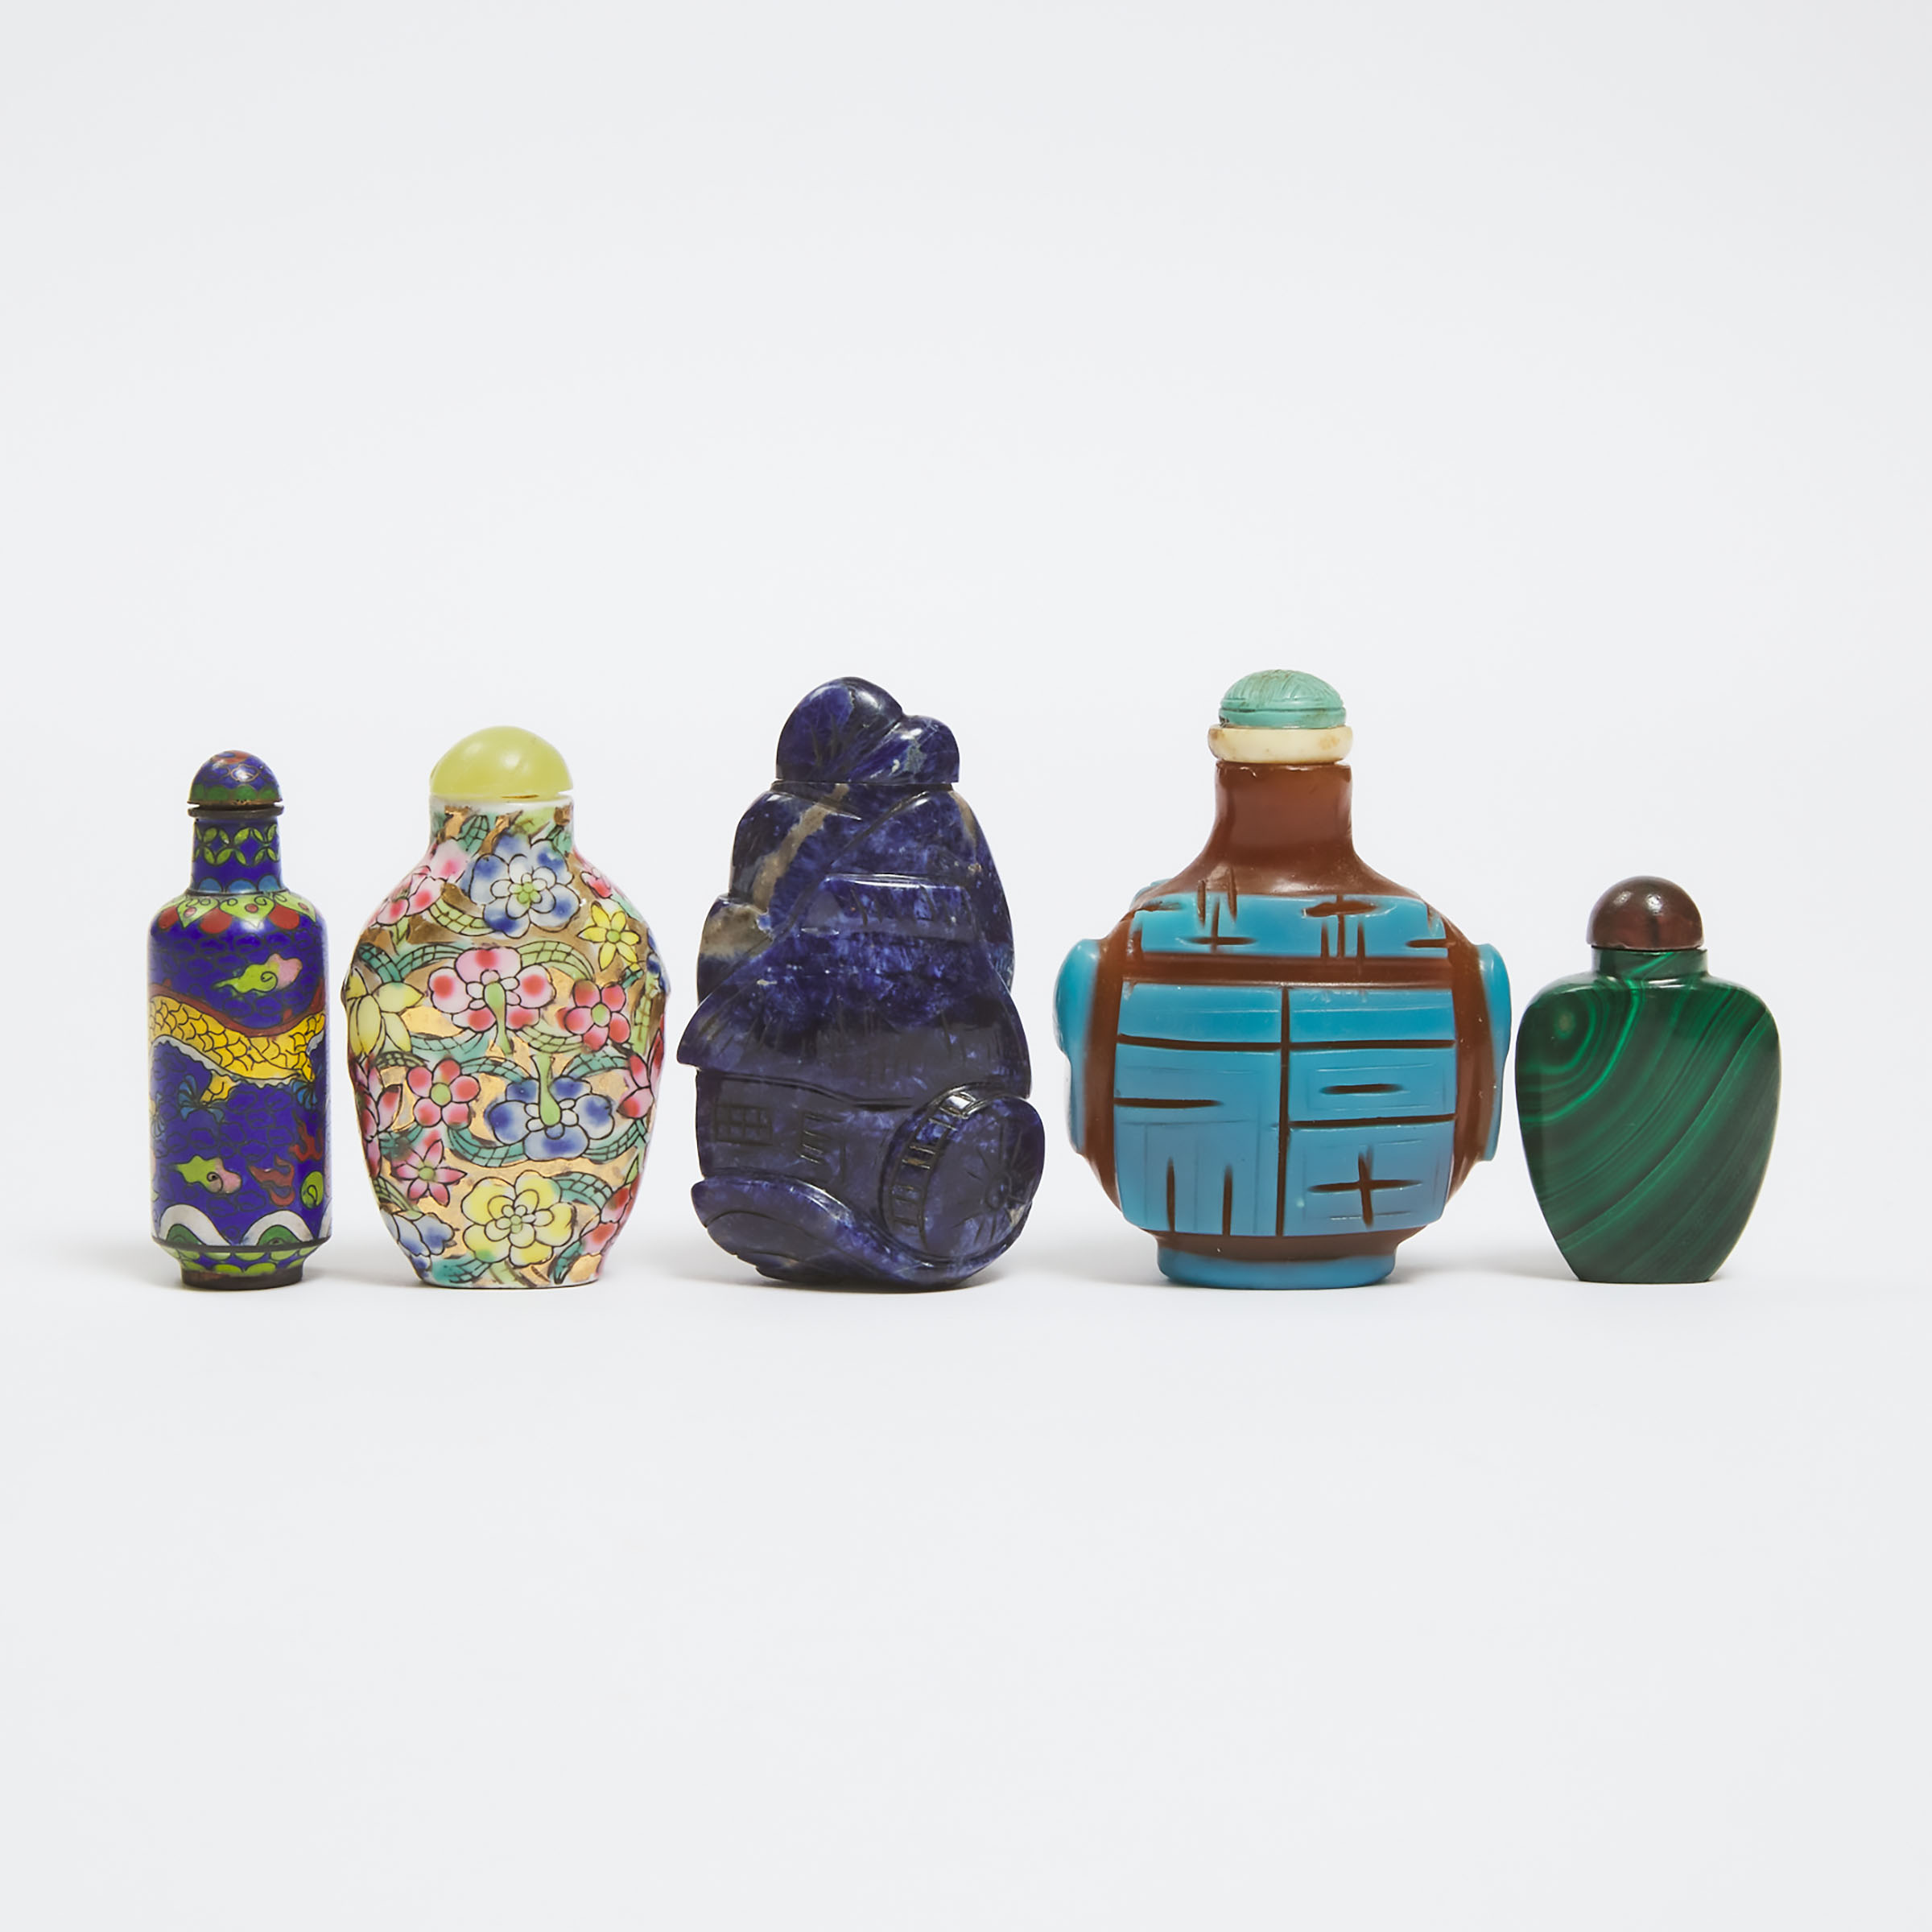 A Group of Five Miscellaneous Snuff Bottles, 19th/20th Century, 晚清/民国 烟壶一组五件, longest length 2.8 in - Image 2 of 2